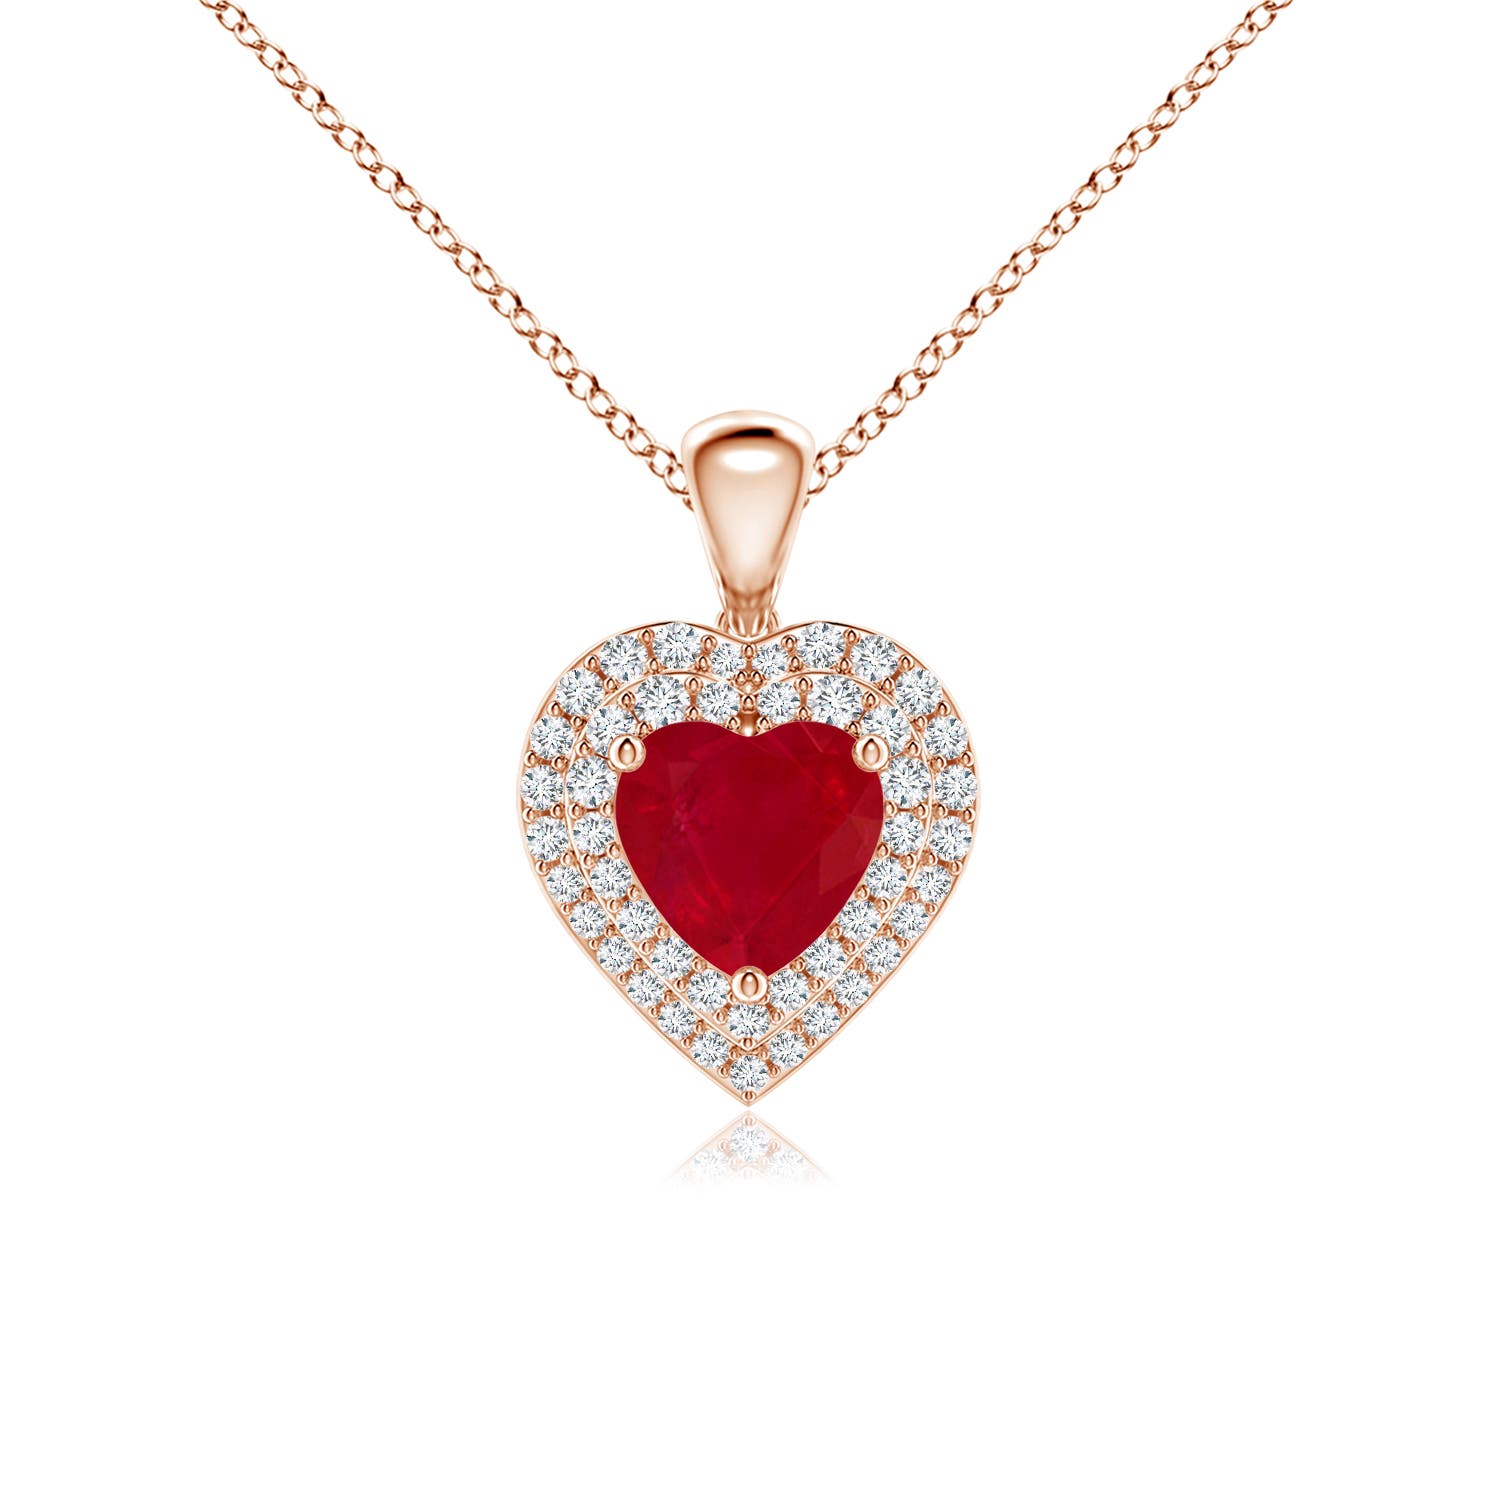 AA - Ruby / 1.25 CT / 14 KT Rose Gold